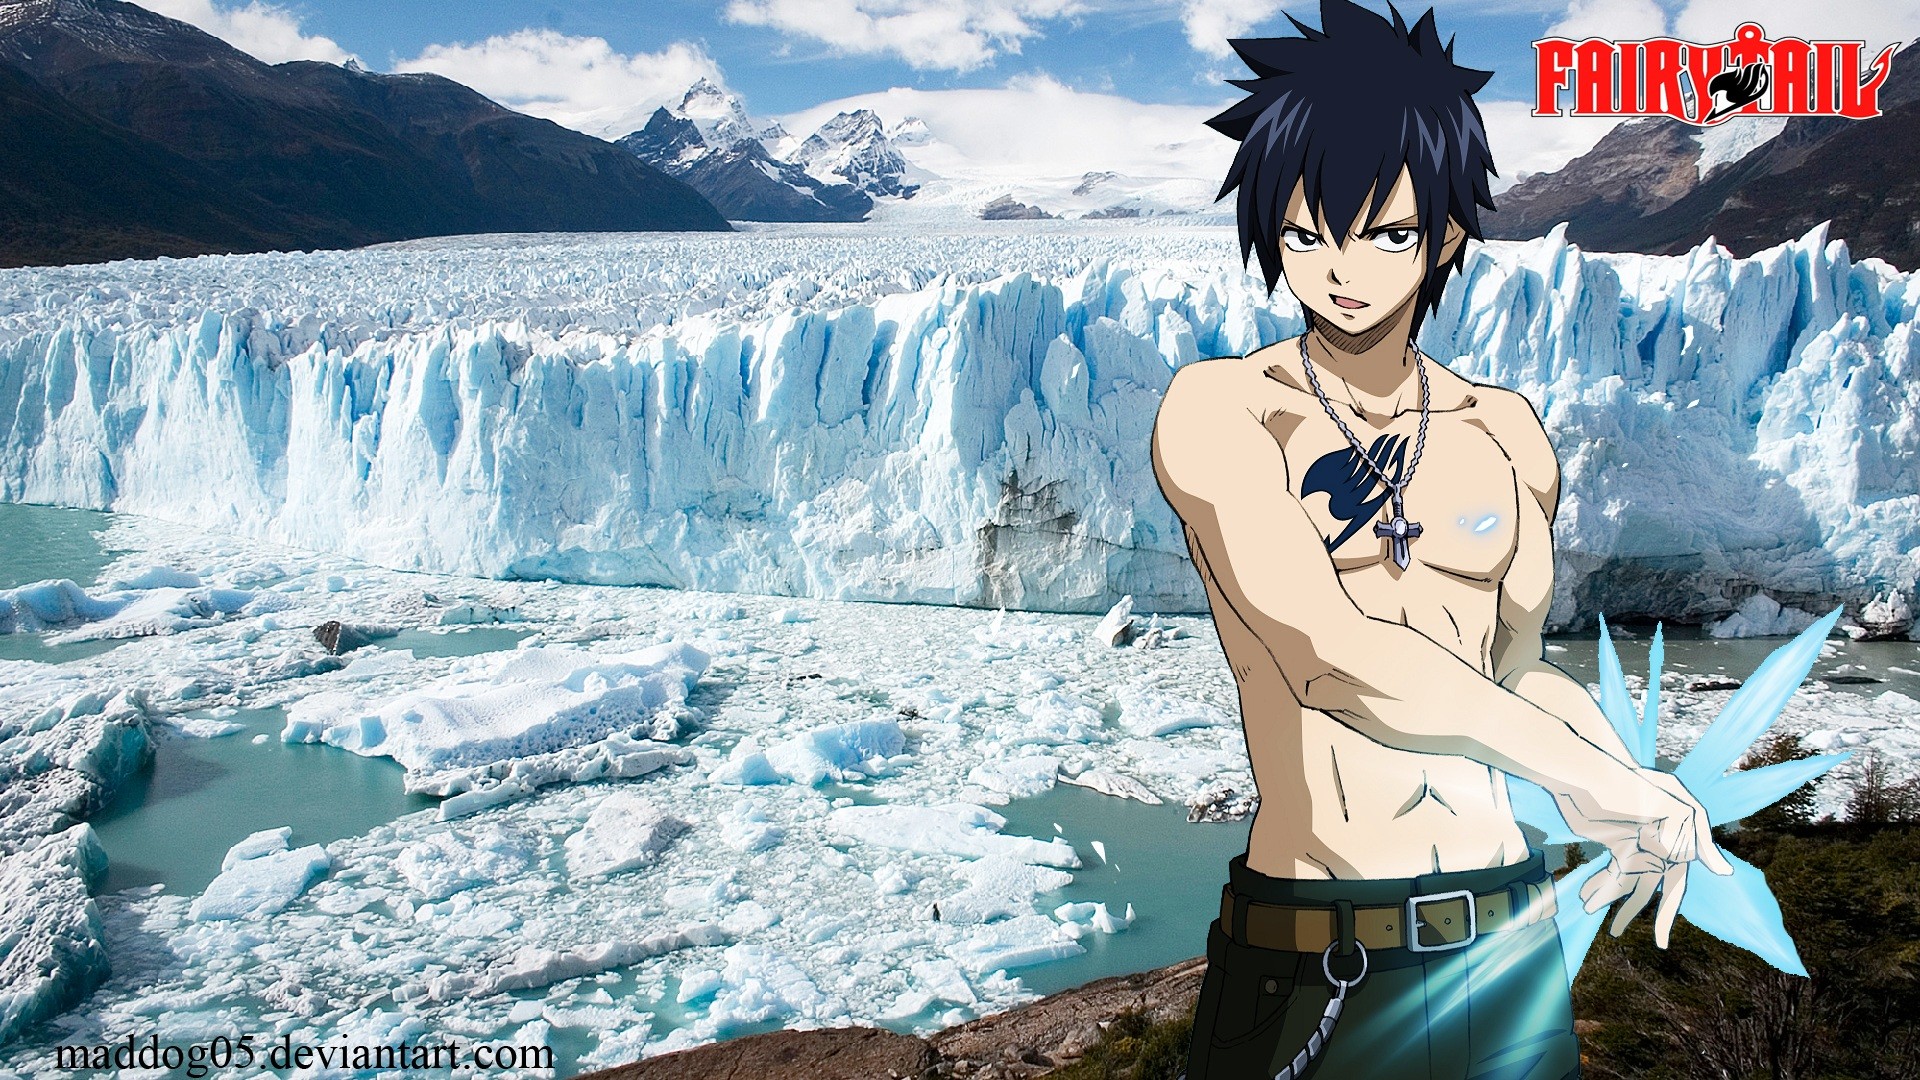 1920x1080 Fairy Tail Guild Of Magnolia images Gray Fullbuster HD wallpaper and  background photos